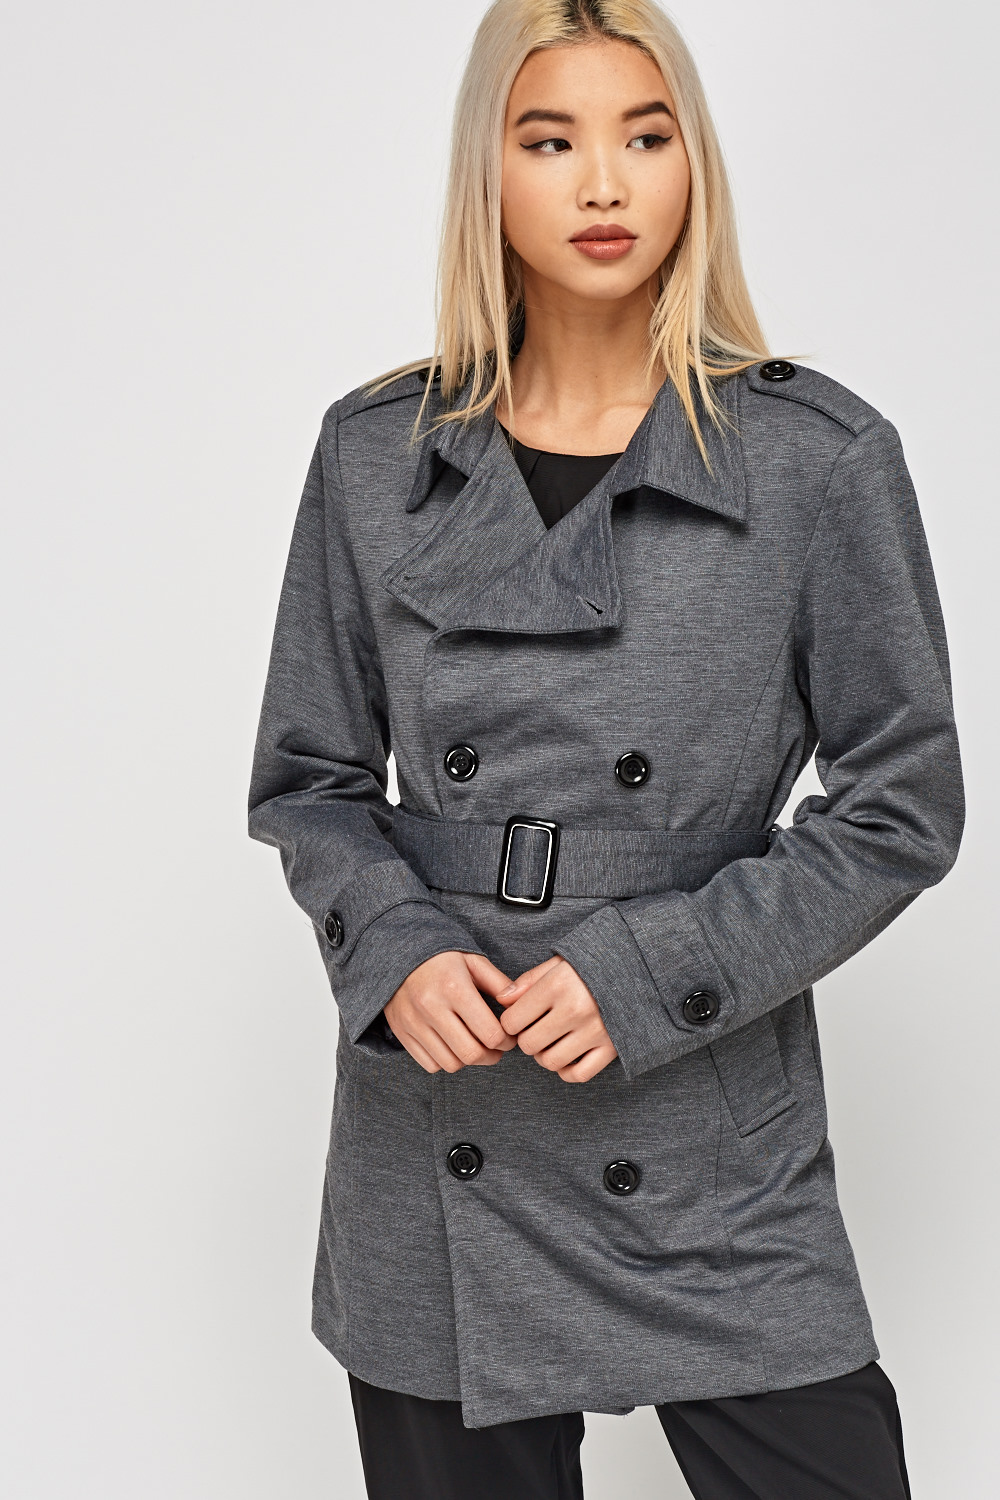 Double Breasted Grey Jacket - Just $7